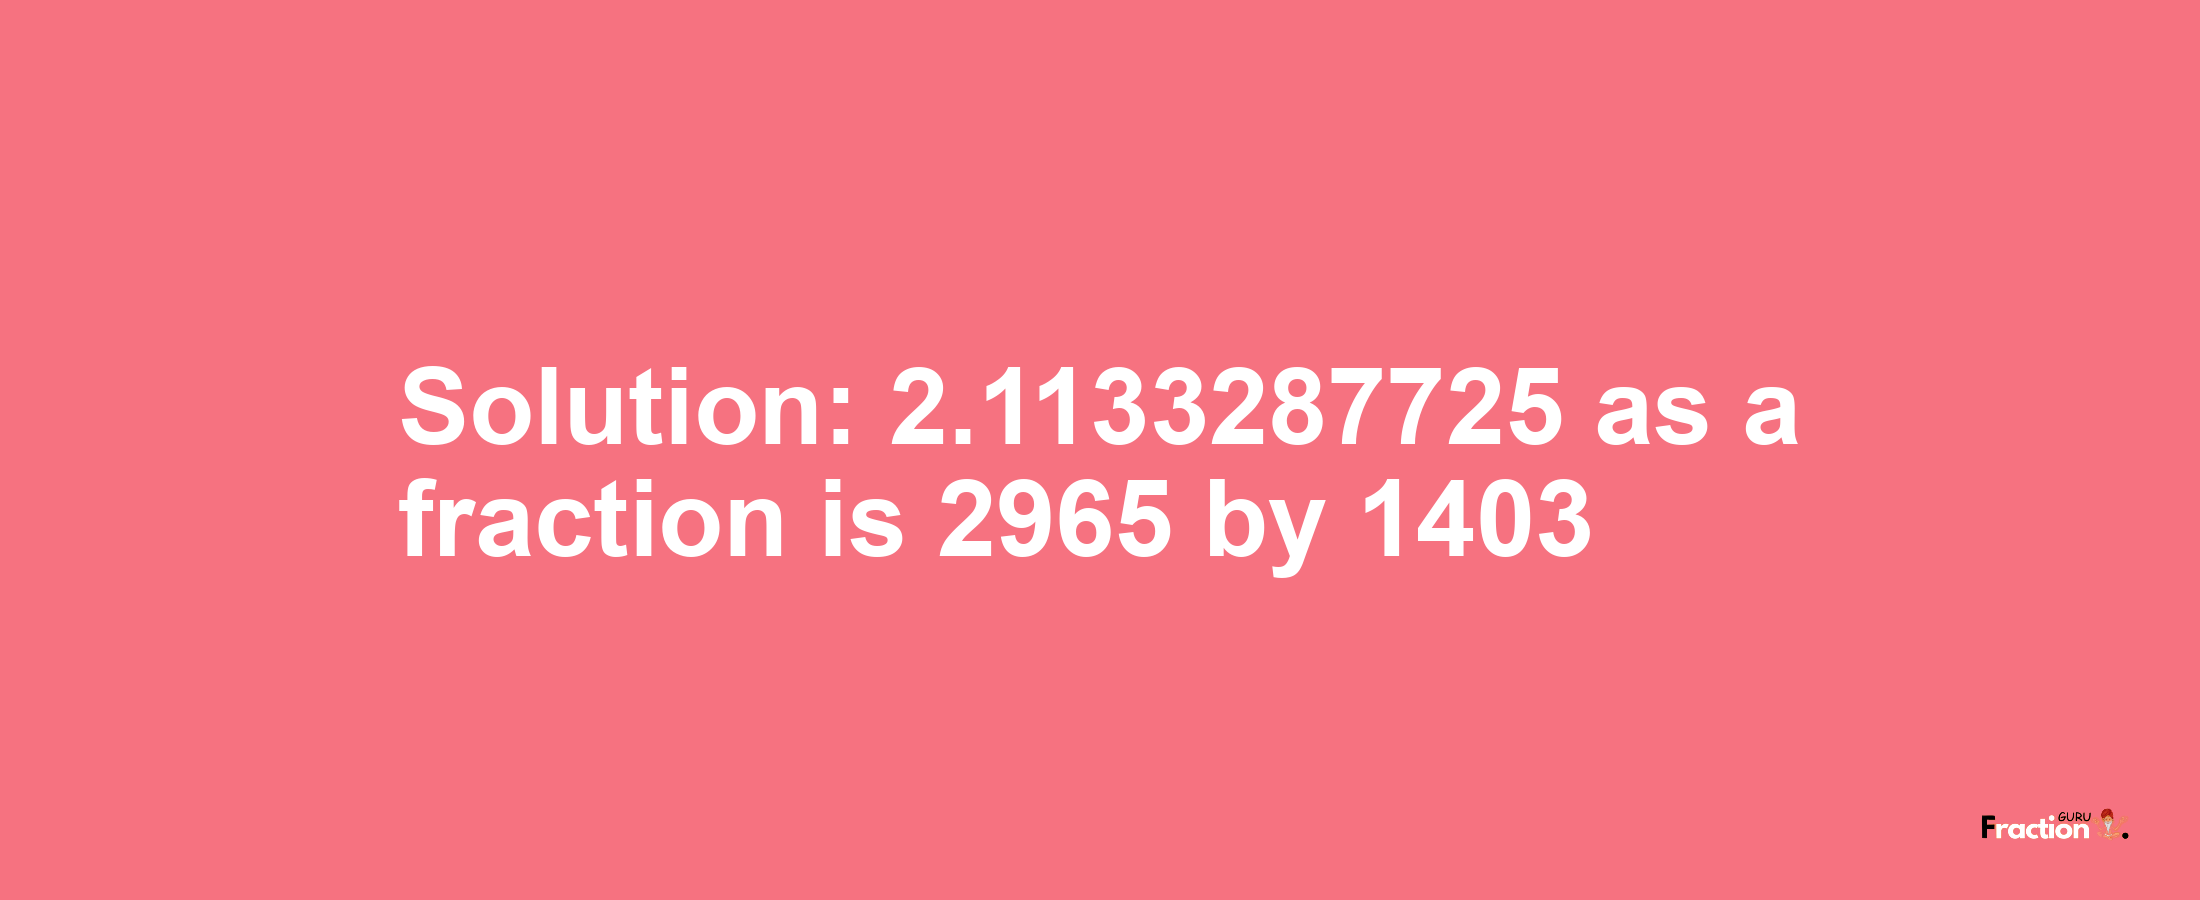 Solution:2.1133287725 as a fraction is 2965/1403